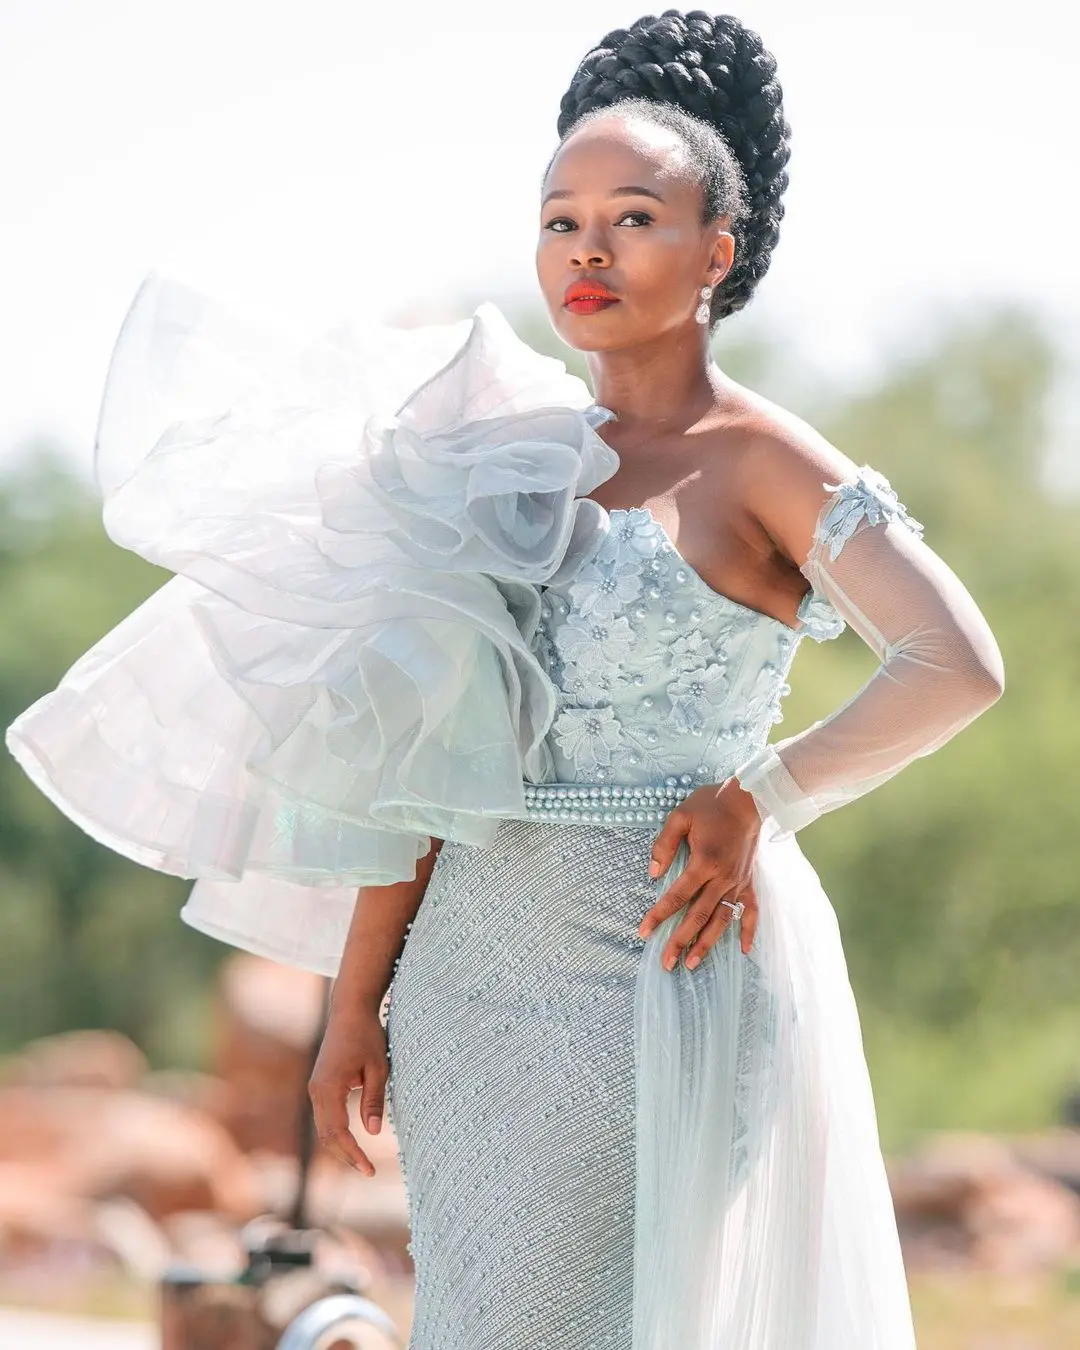 Sindi Dlathu is one of South Africa’s most talented actress